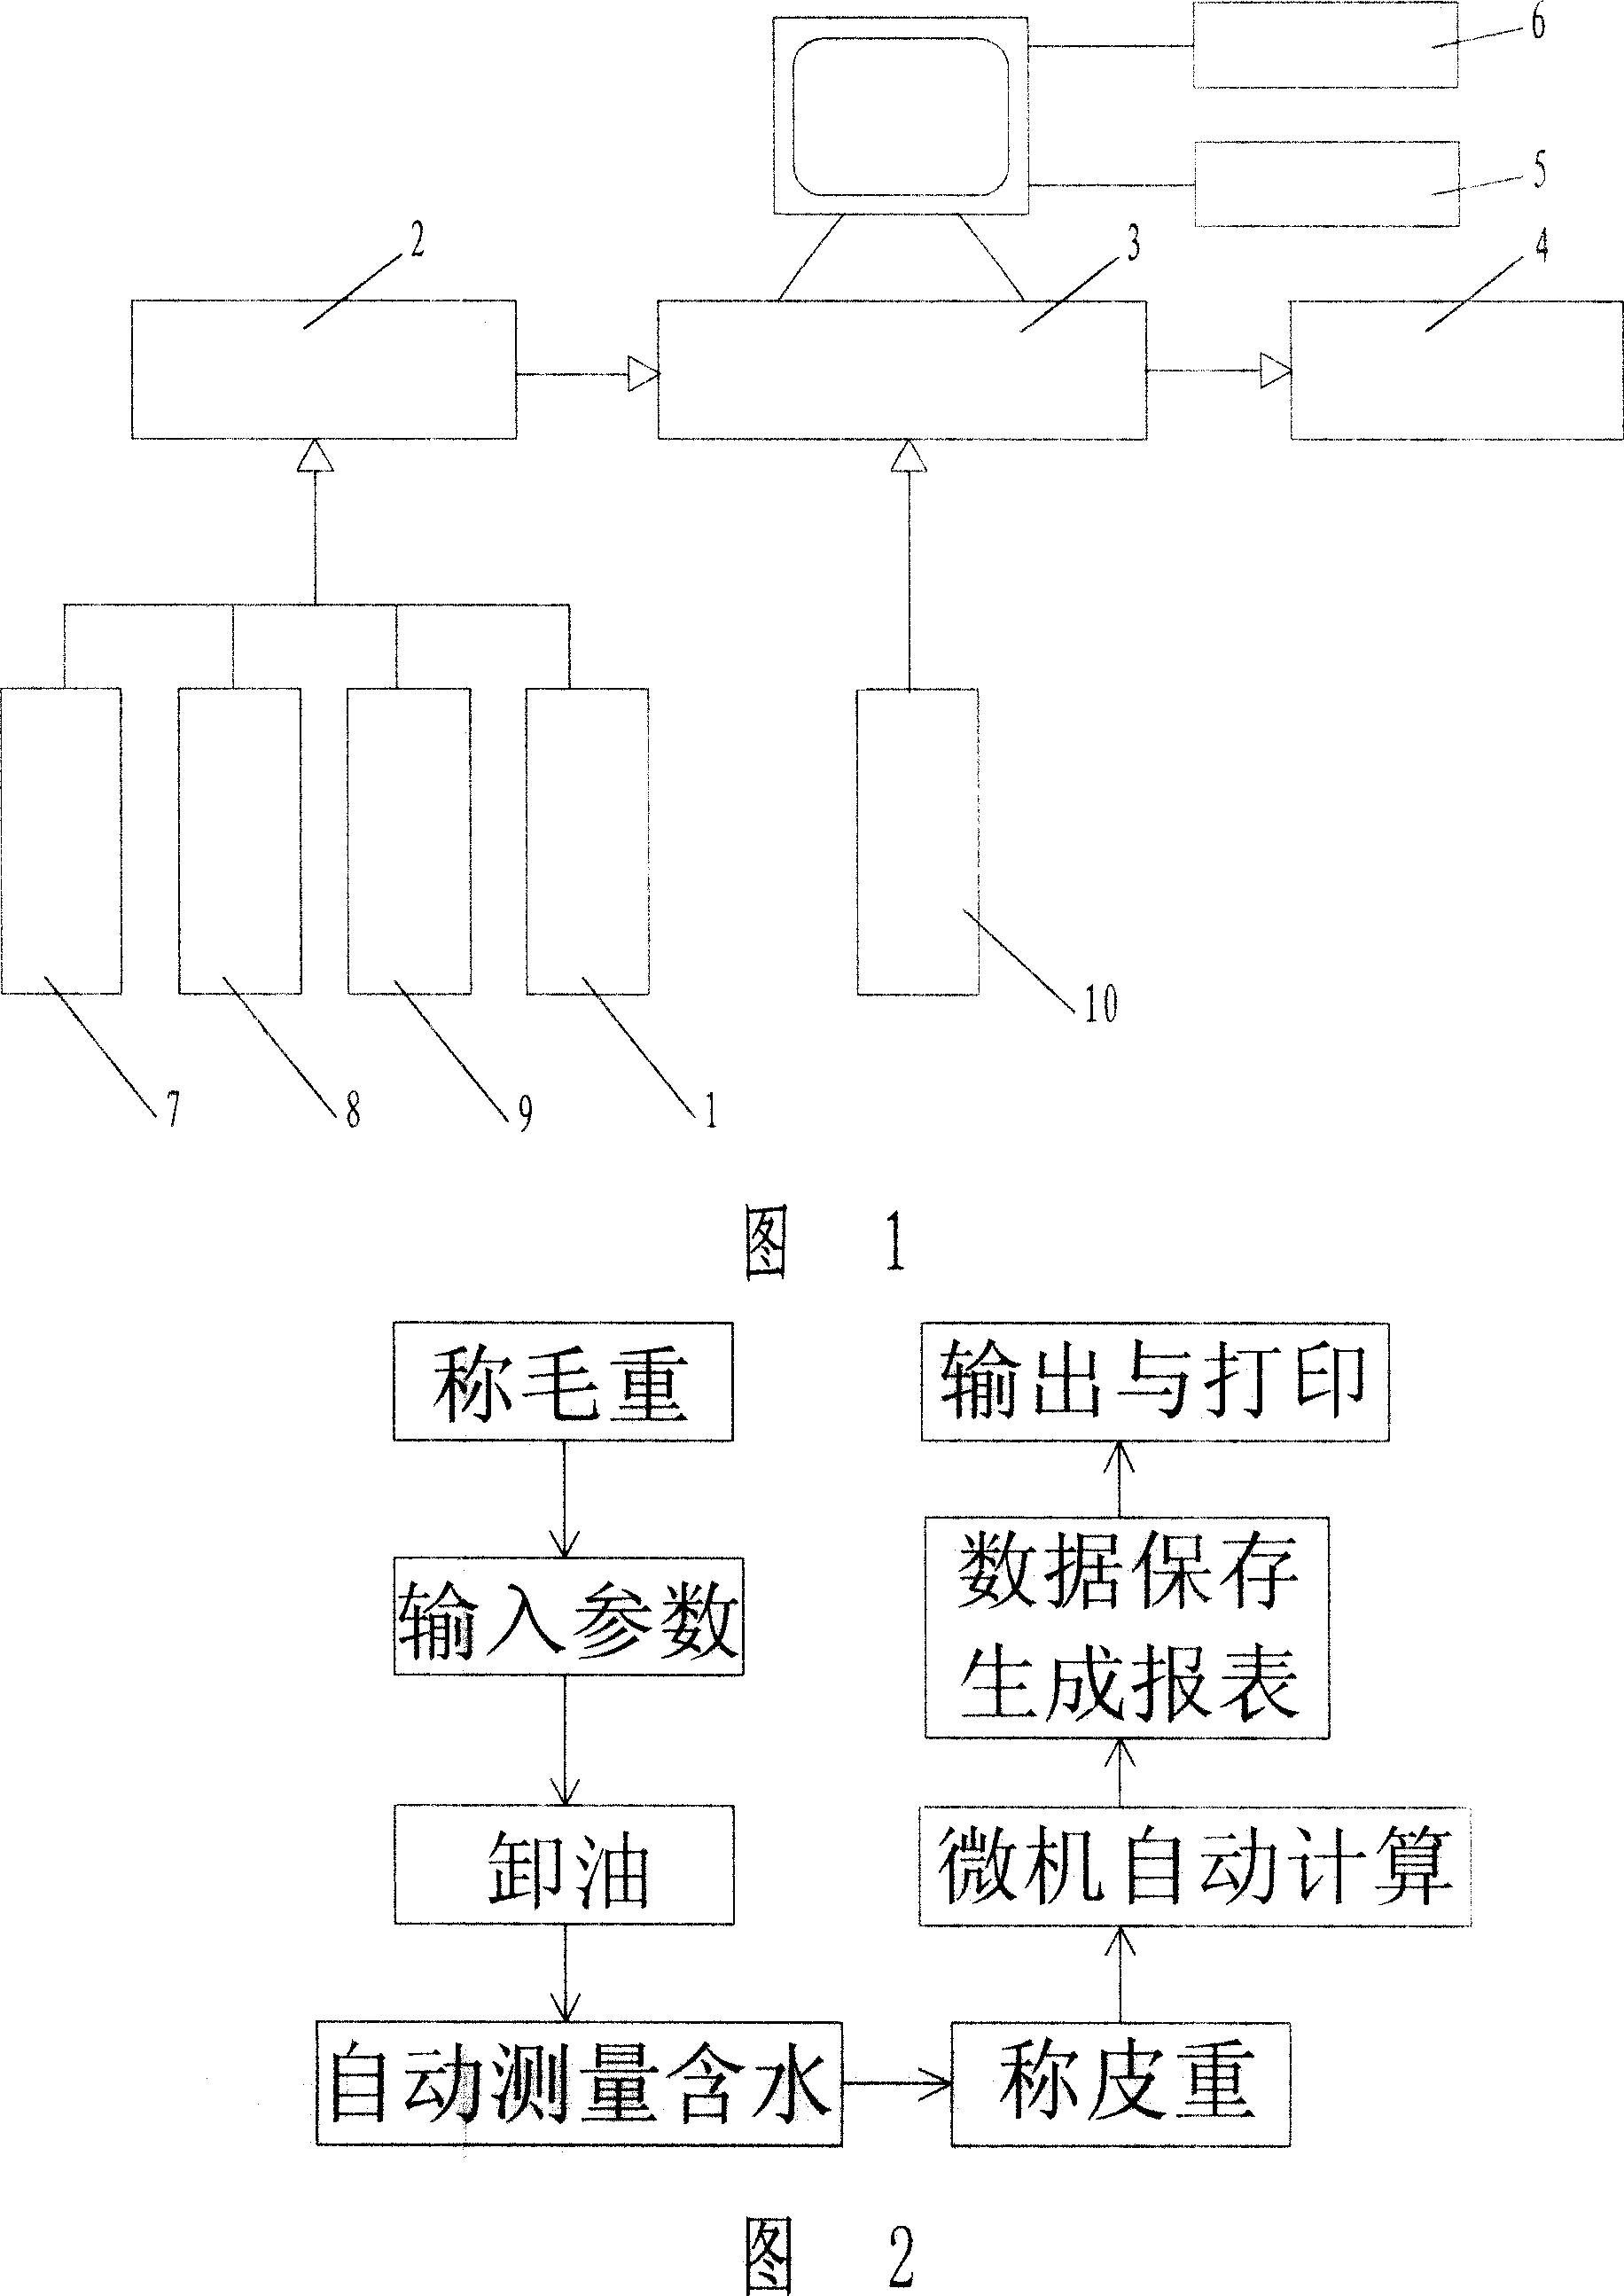 Method and system for automatic counting, monitoring and controlling water content of fuel tank car